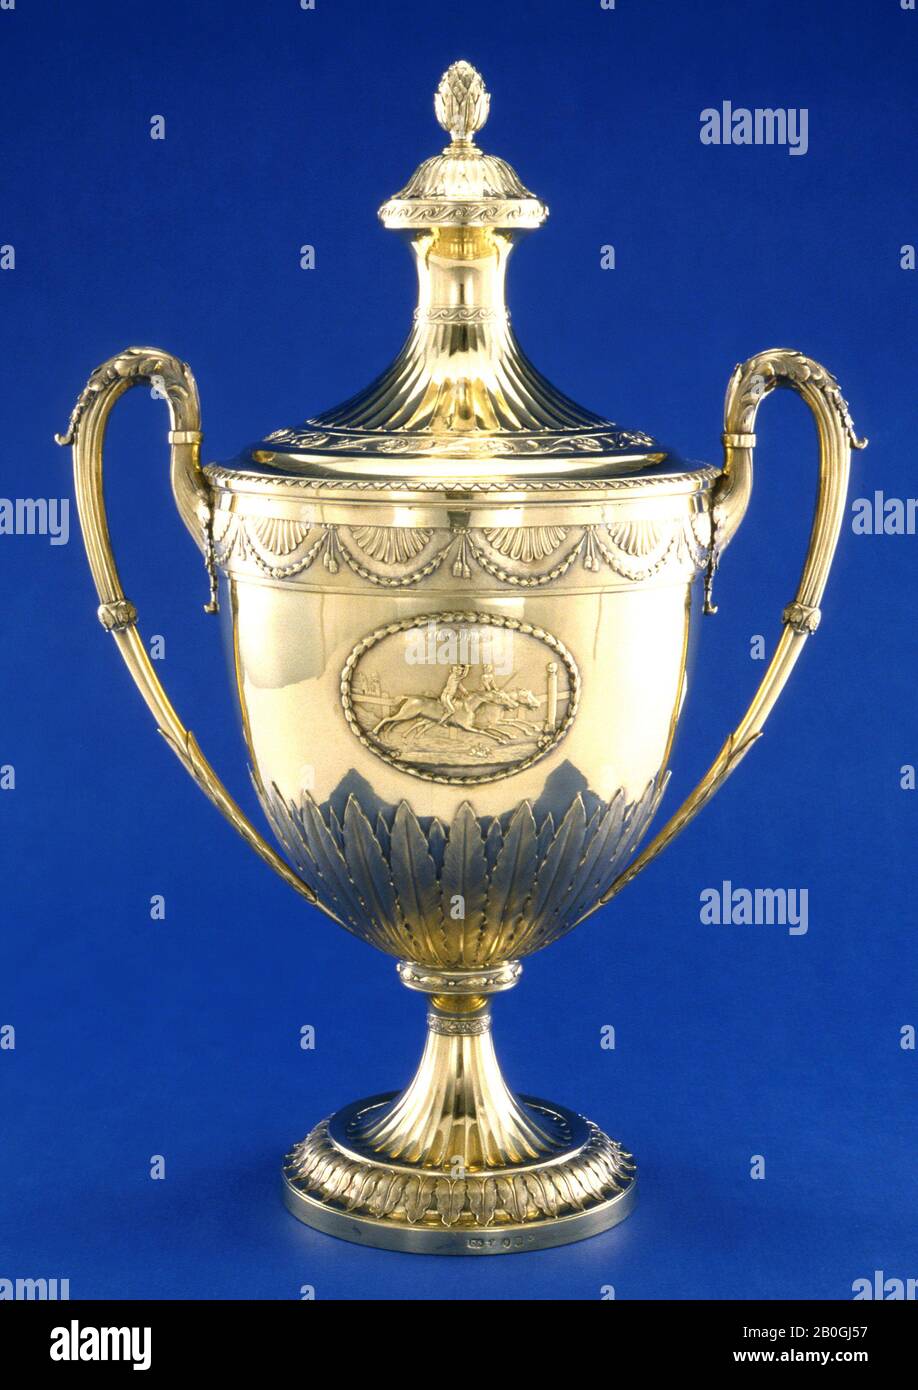 Paul Storr, English, 1771–1844, Two-Handled Cup and Cover, 1797/98, Silver gilt, 18 5/16 x 12 3/4 x 8 1/8 in. (46.5 x 32.4 x 20.6 cm Stock Photo